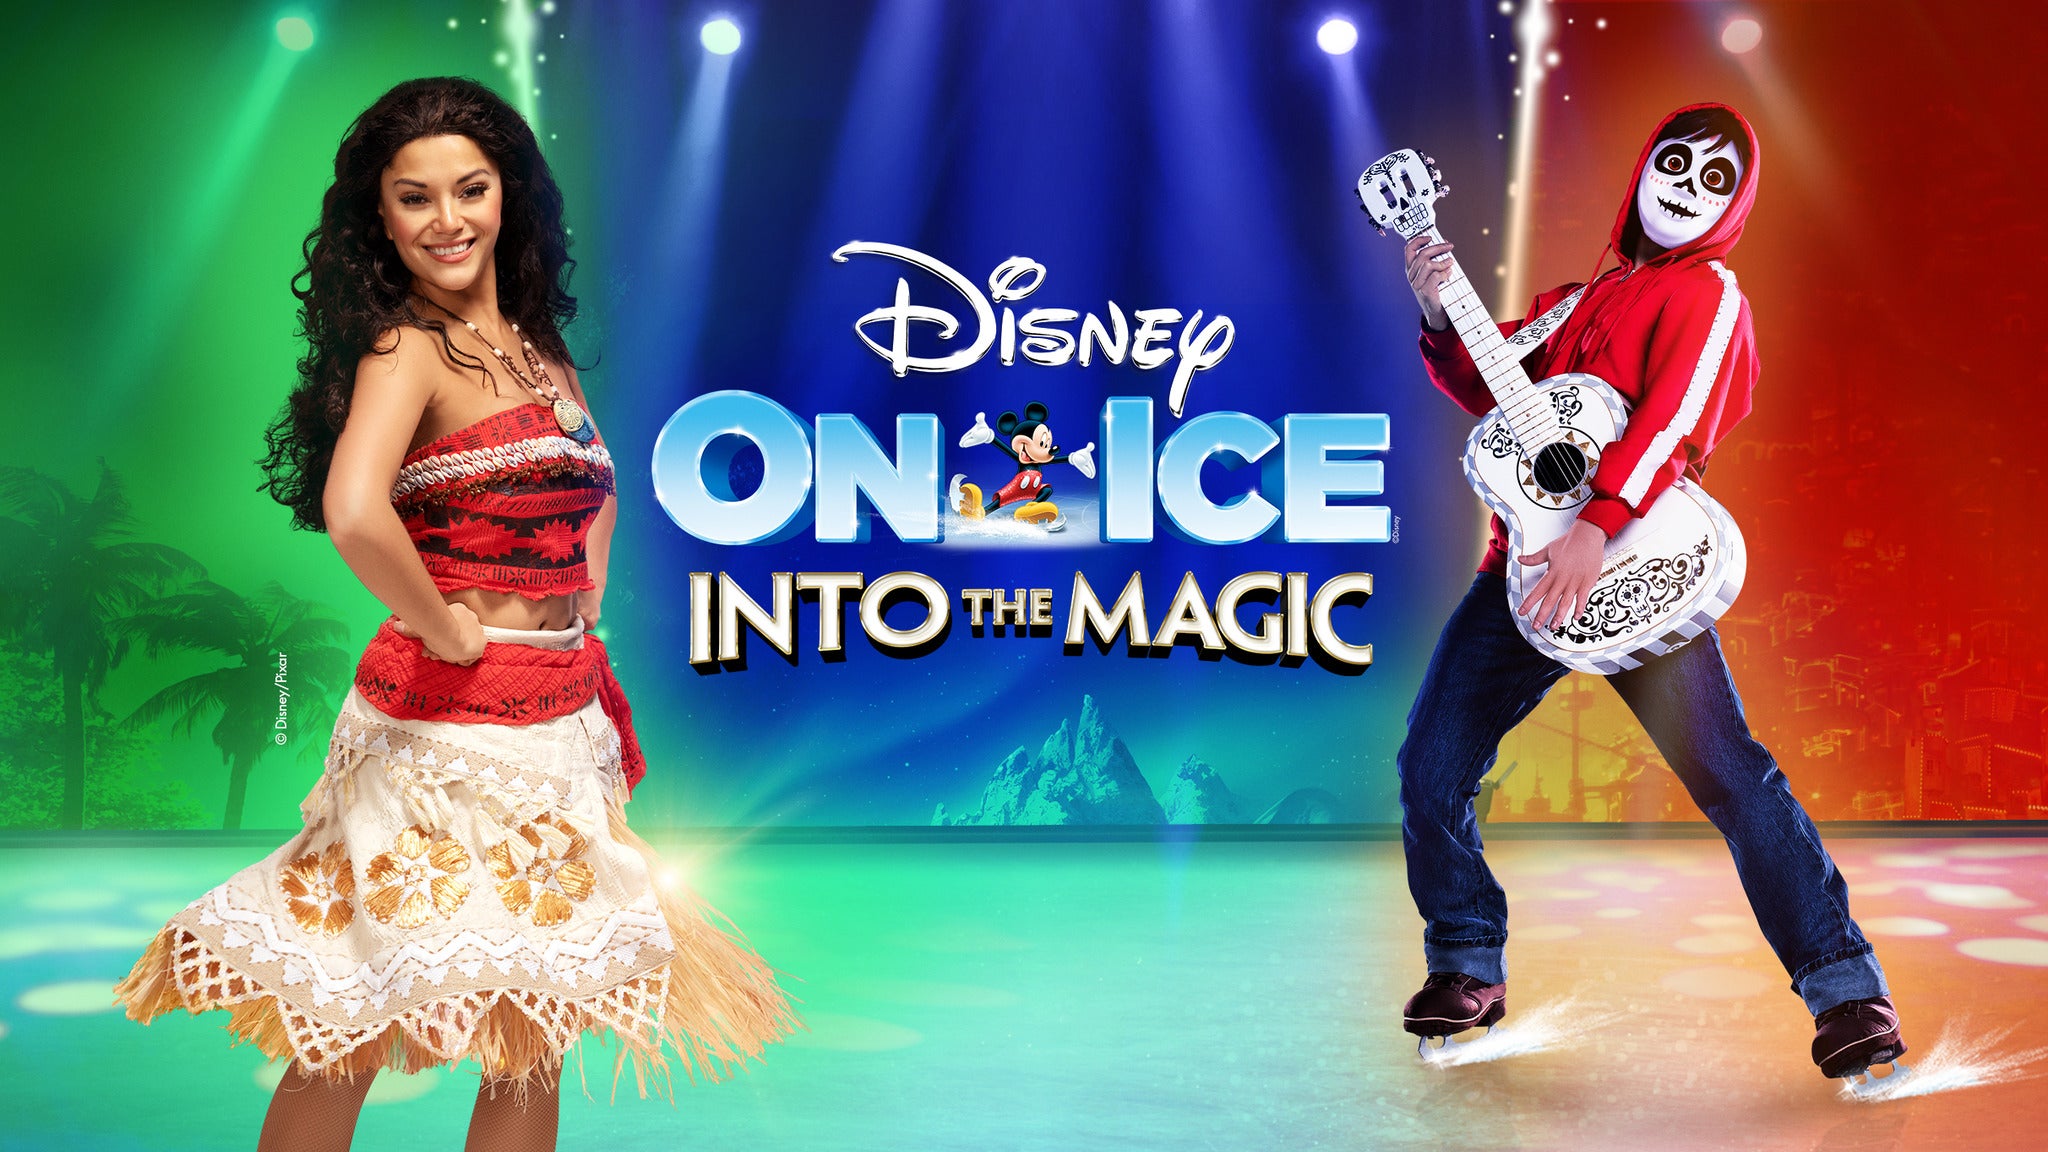 Sign Up To Win Disney On Ice Presents Into The Magic at SNHU Arena